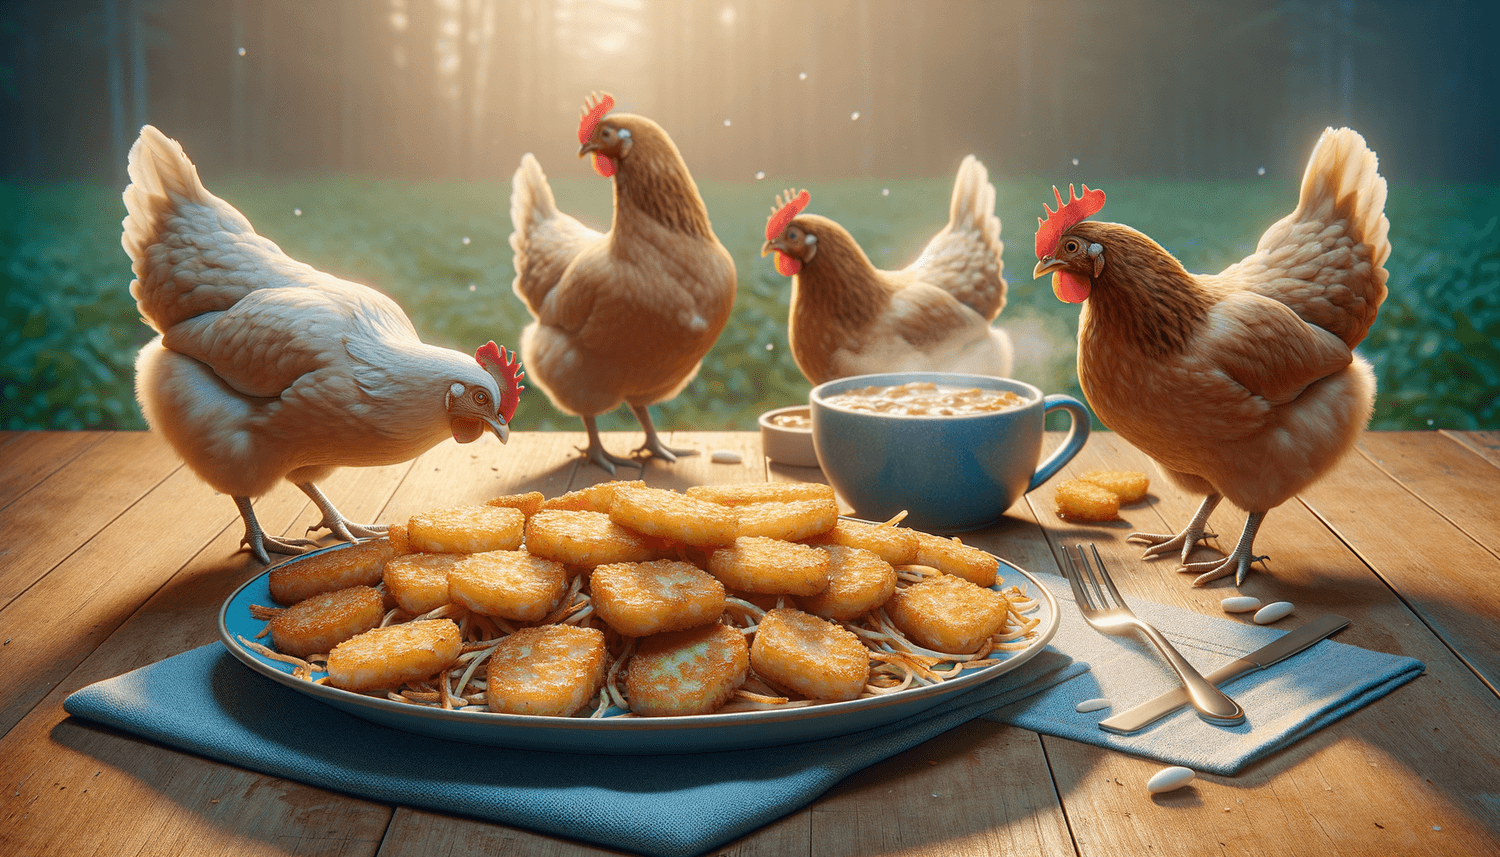 Can Chickens Eat Hash Browns?